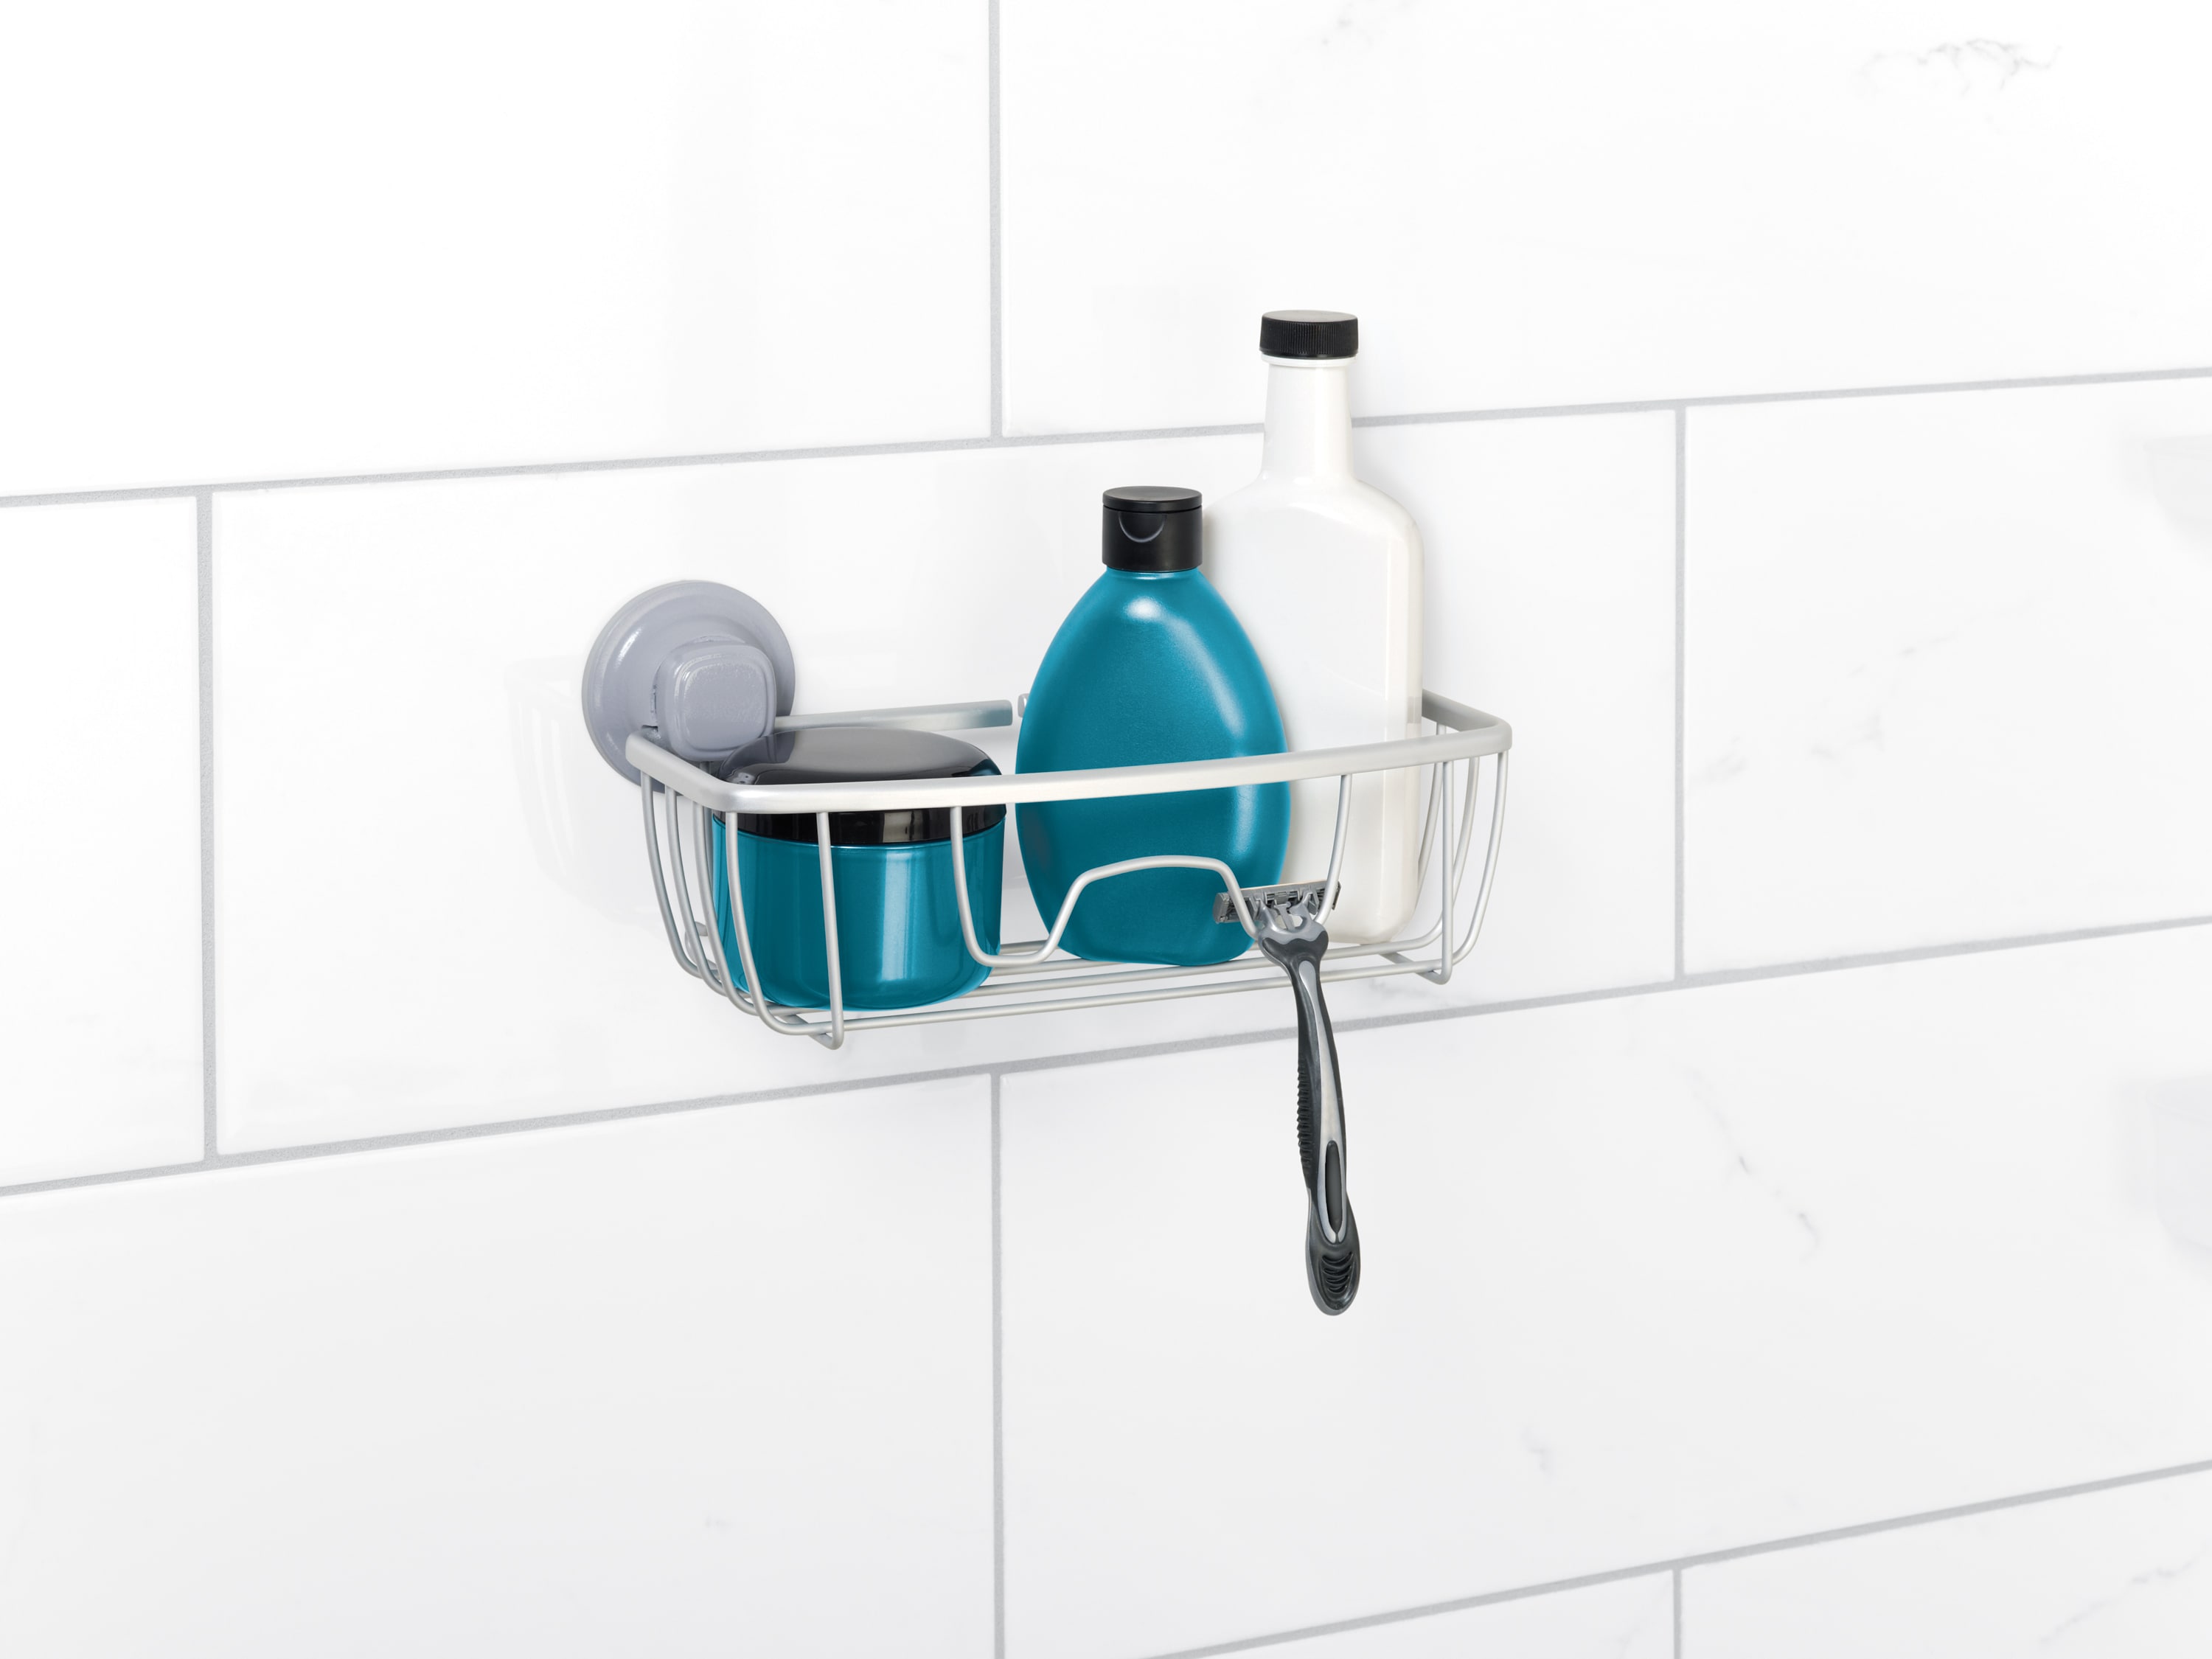 Style Selections Satin Chrome Aluminum 1-Shelf Hanging Shower Caddy 5.63-in  x 5.36-in x 2.5-in in the Bathtub & Shower Caddies department at